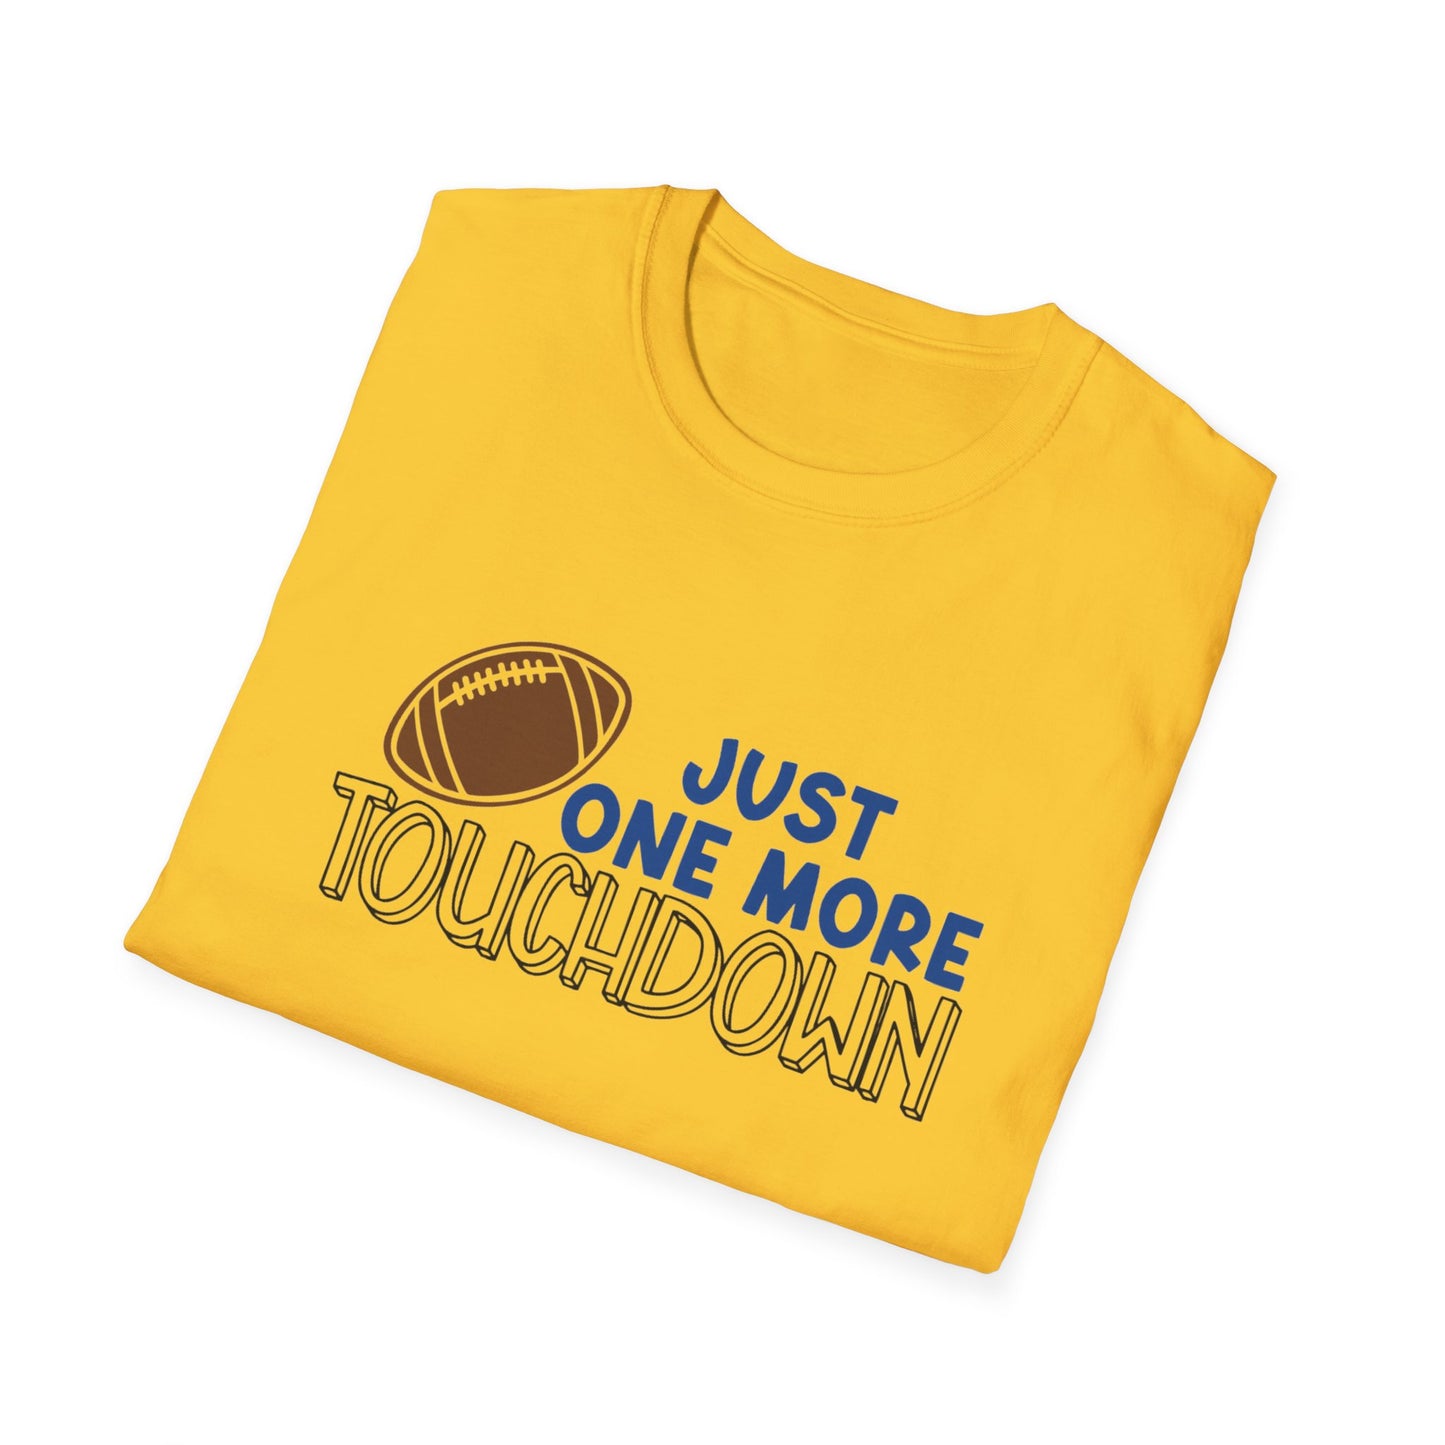 Just One More Touchdown | Unisex T-Shirt